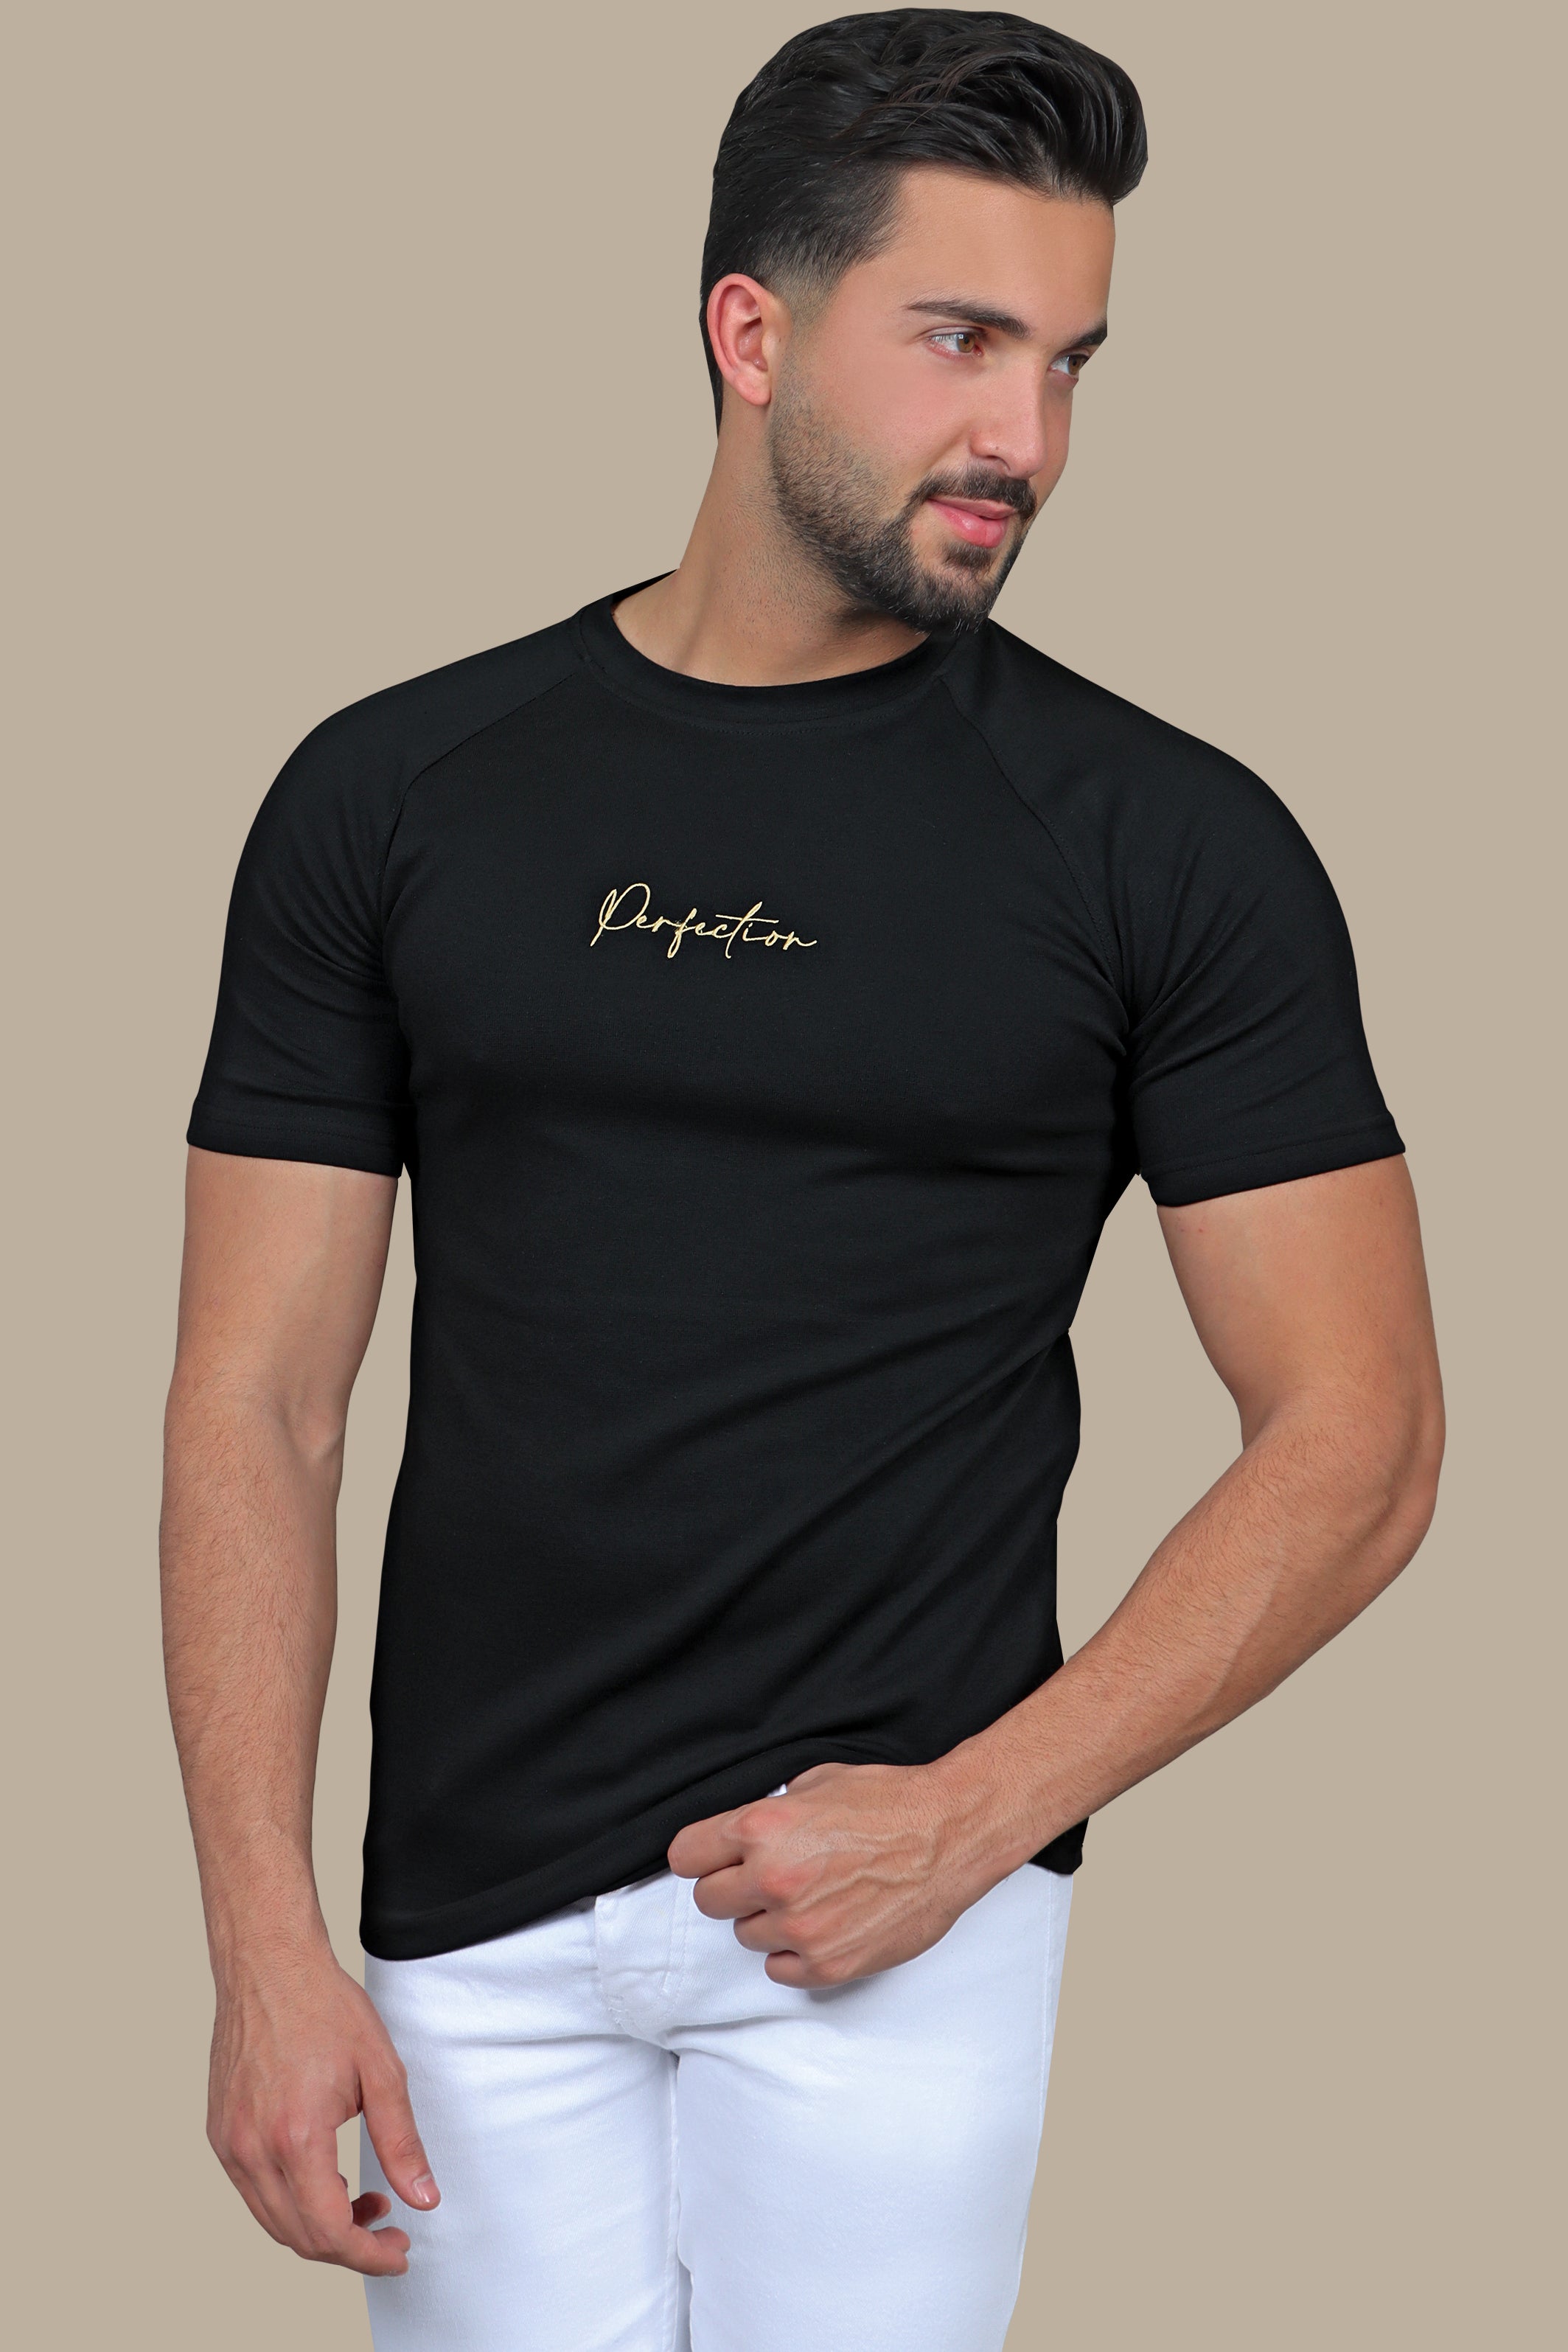 Printed Perfection: Black T-Shirt with Word Design